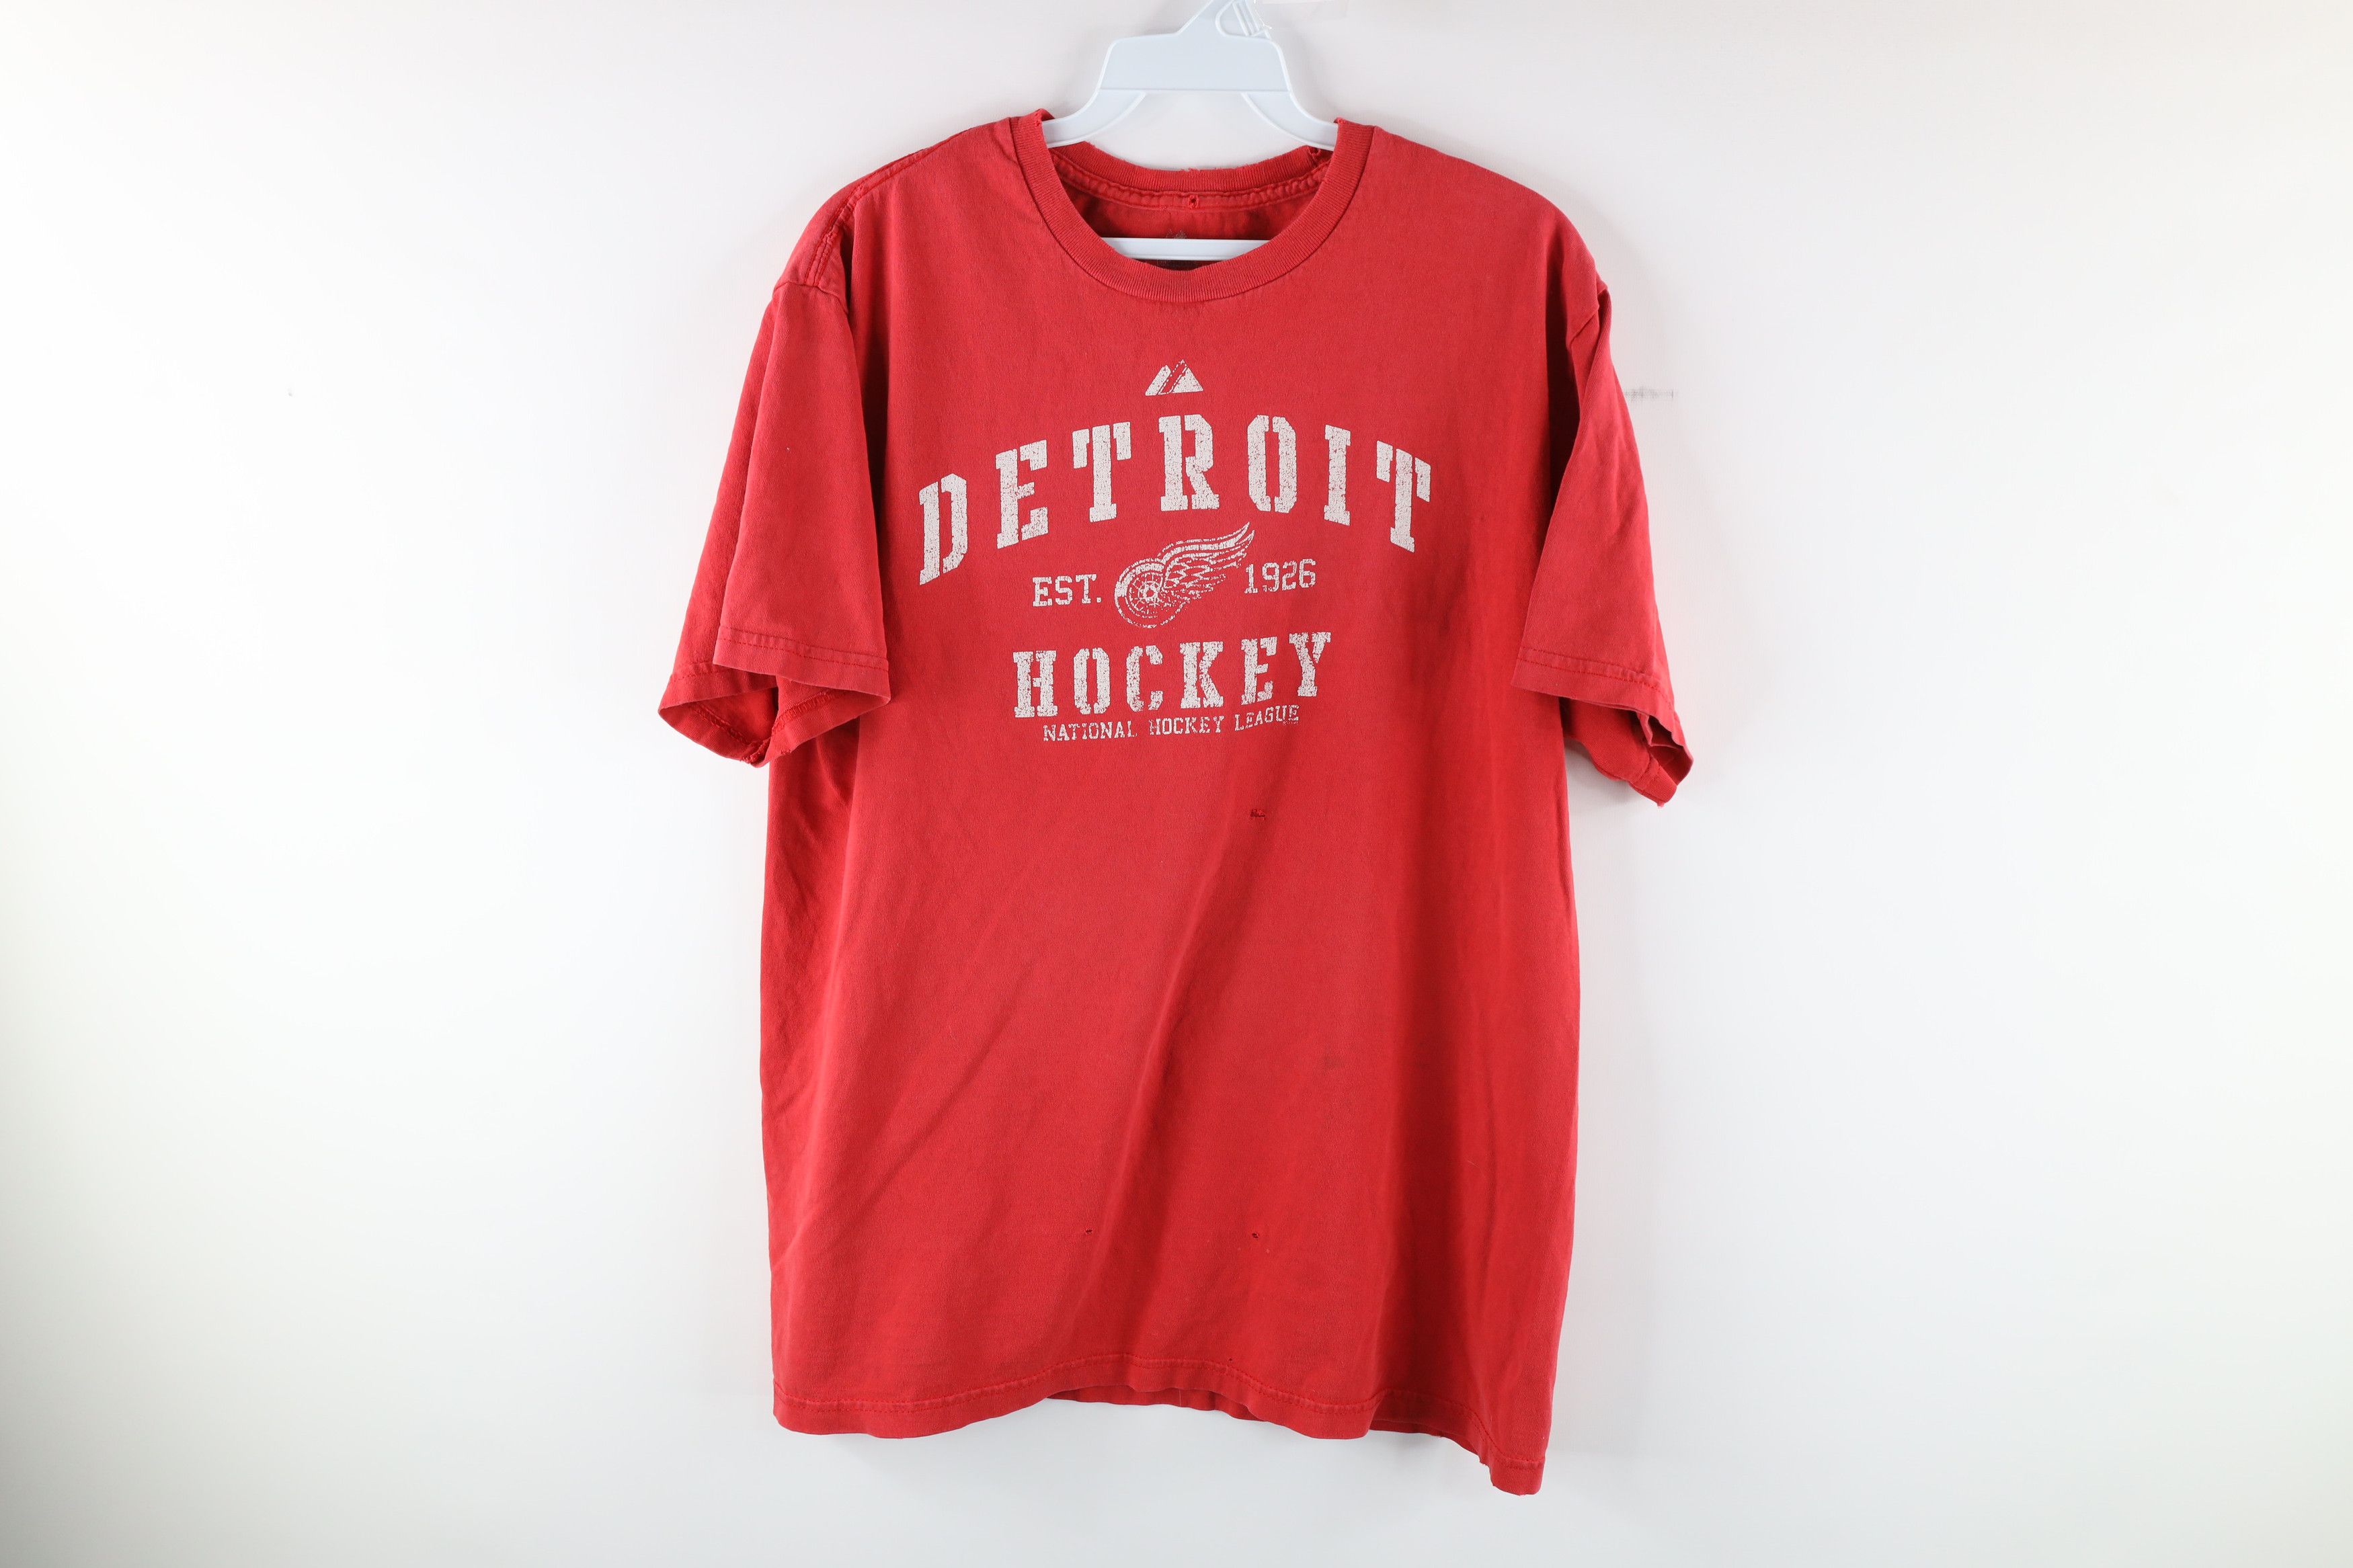 Vintage Vintage Majestic Thrashed Detroit Red Wings Hockey T-Shirt Size US M / EU 48-50 / 2 - 1 Preview